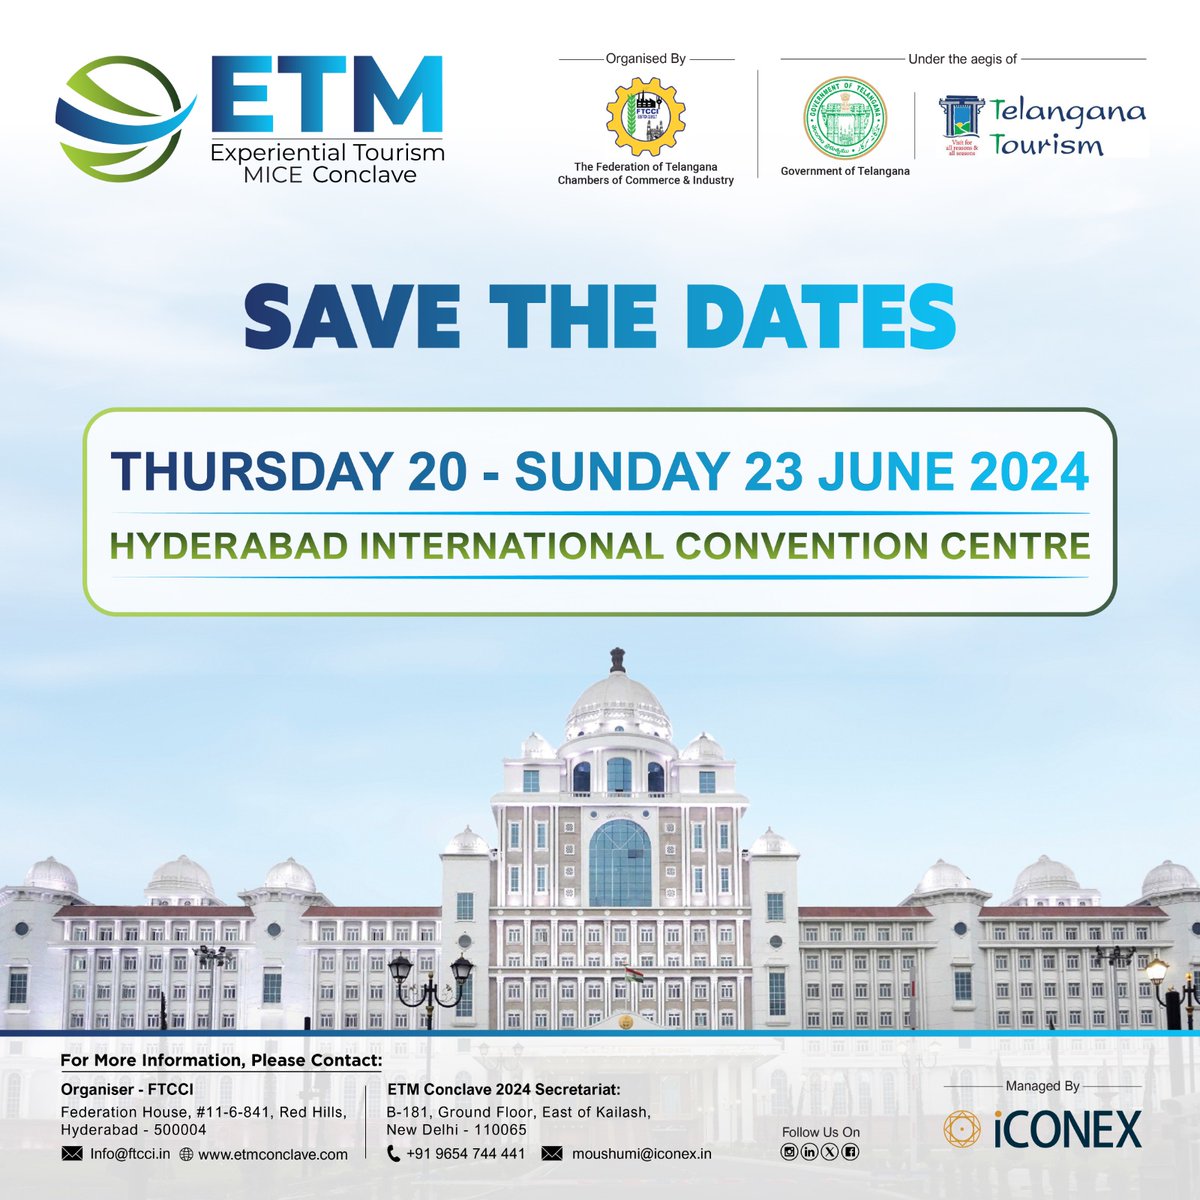 FTCCI THMMICEE committee & Govt. of Telangana presents the Inaugural Edition of FTCCI ETM Conclave 2024, managed by iCONEX. Join us for two days of Familiarization Tours and two days of networking at HICC, Hyderabad from June 20th to 23rd ! #ETMConclave #FTCCI #Hyderabad #Tourism